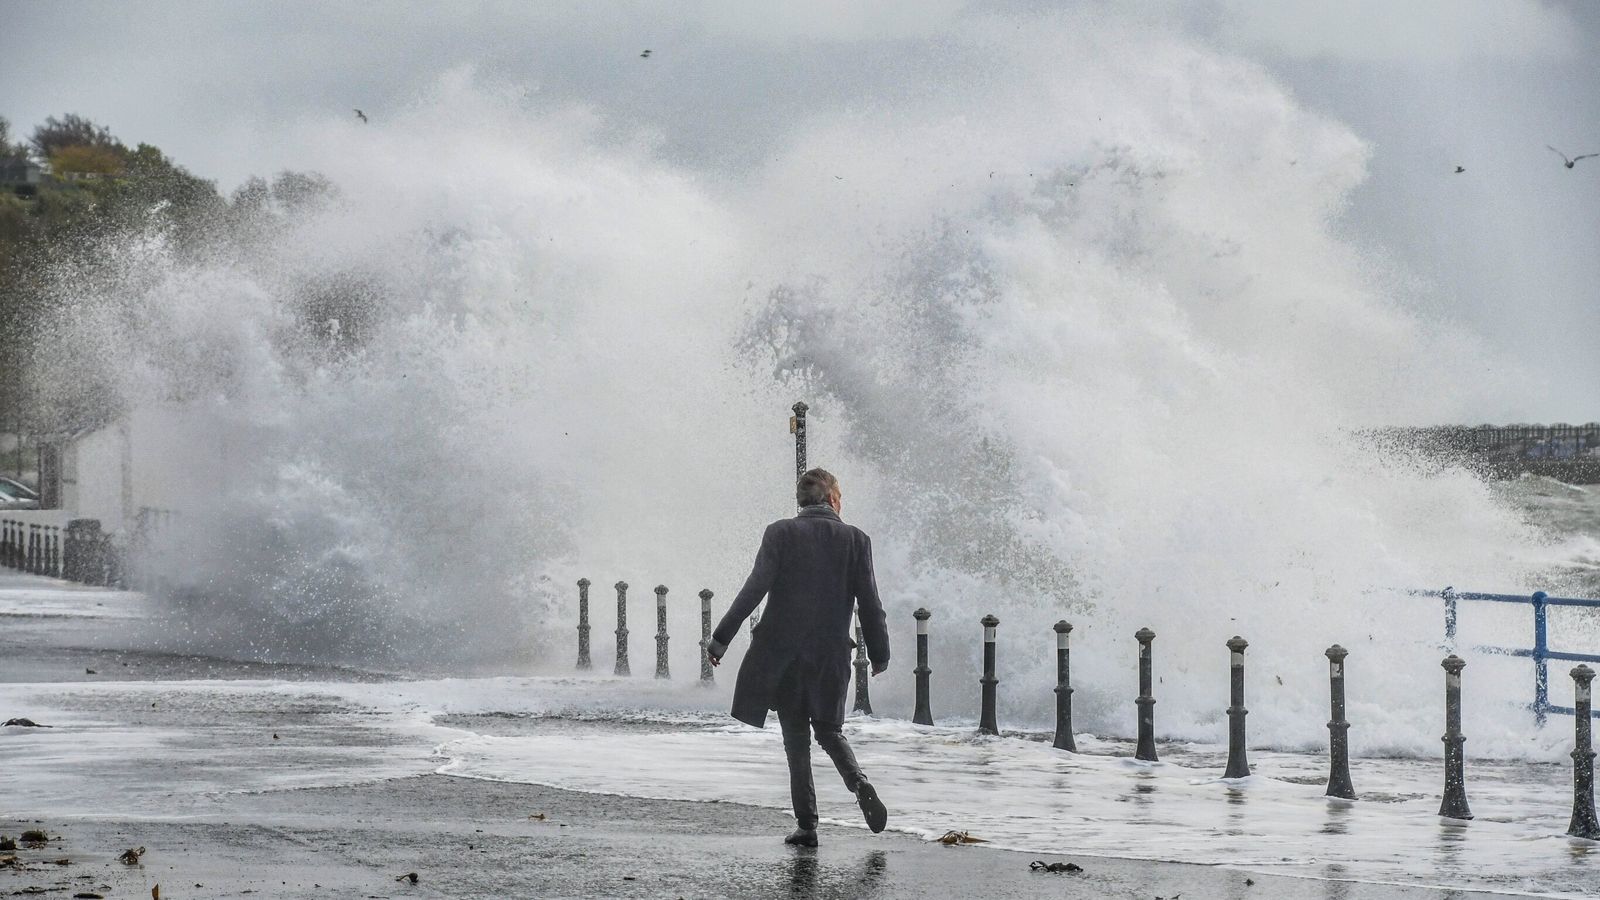 New weather warnings for parts of UK after Storm Kathleen disruption